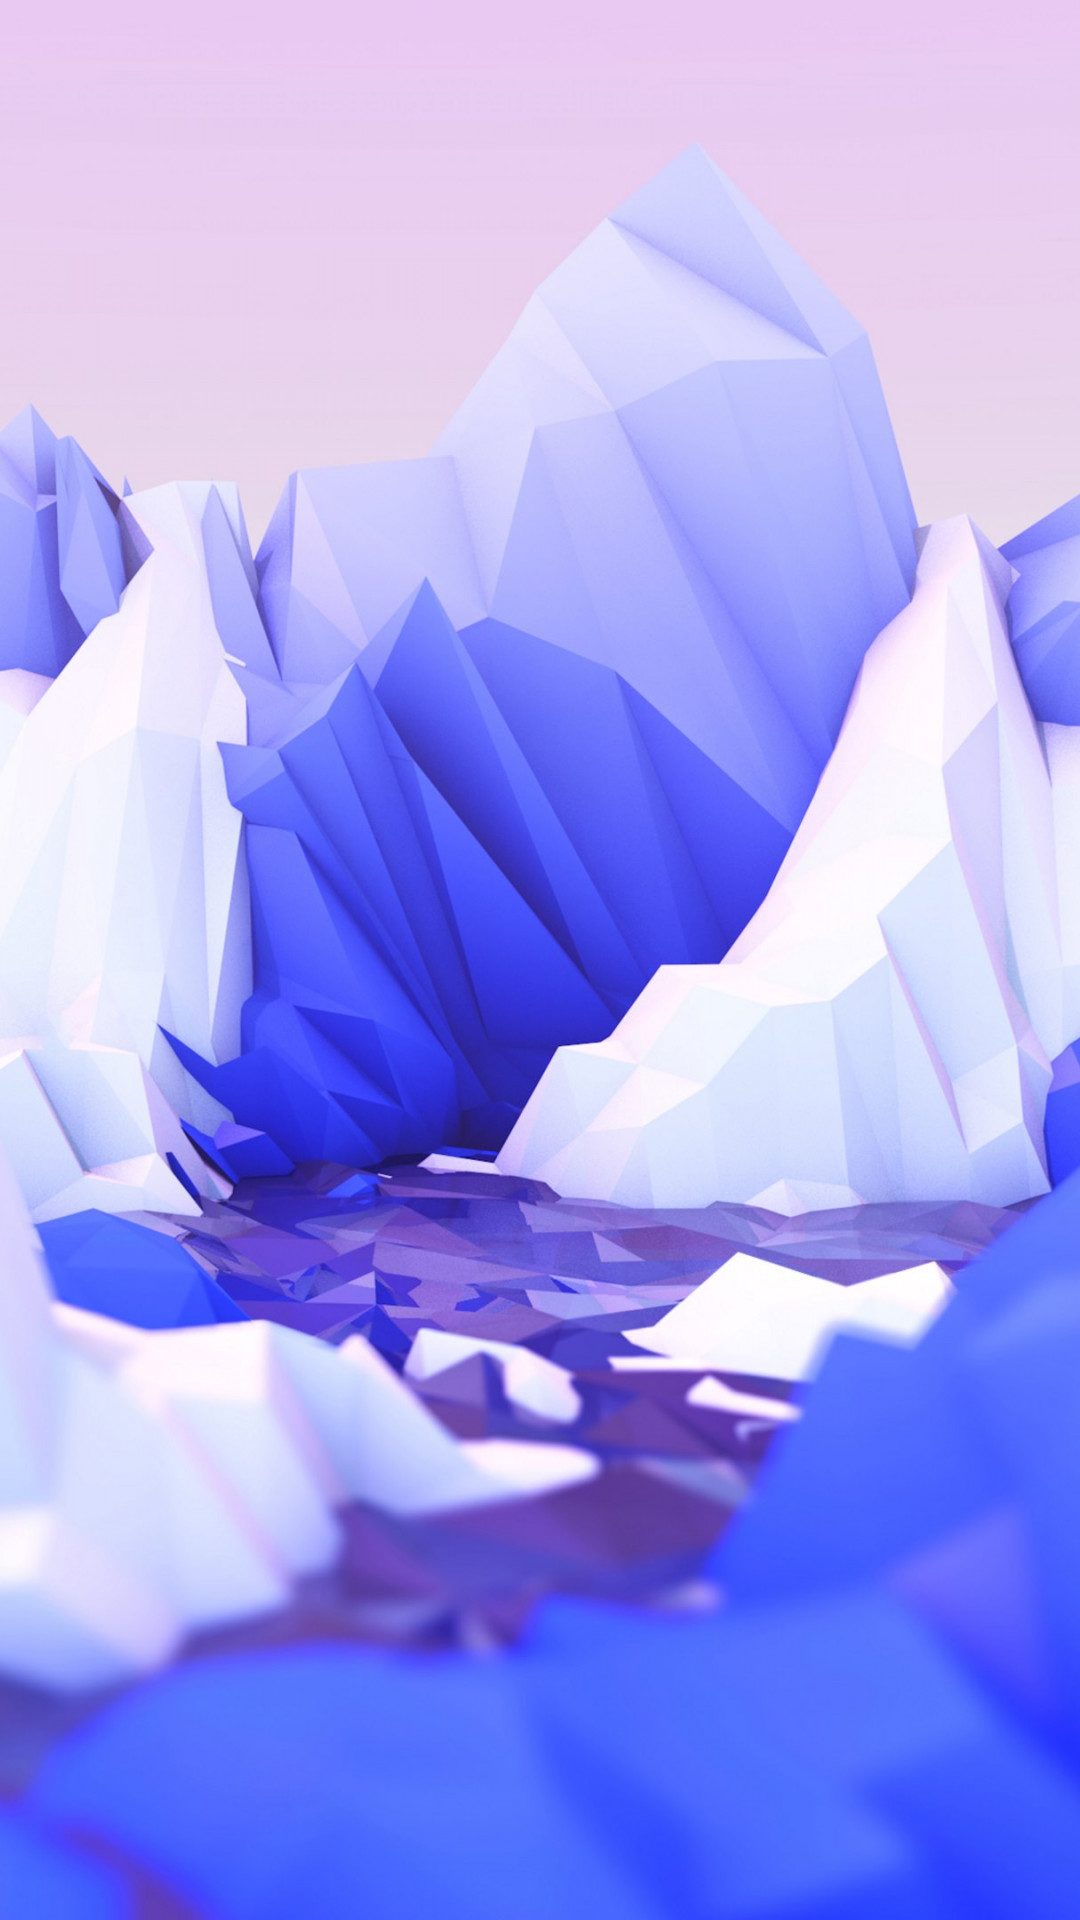 Low poly graphic design wallpaper 1080x1920